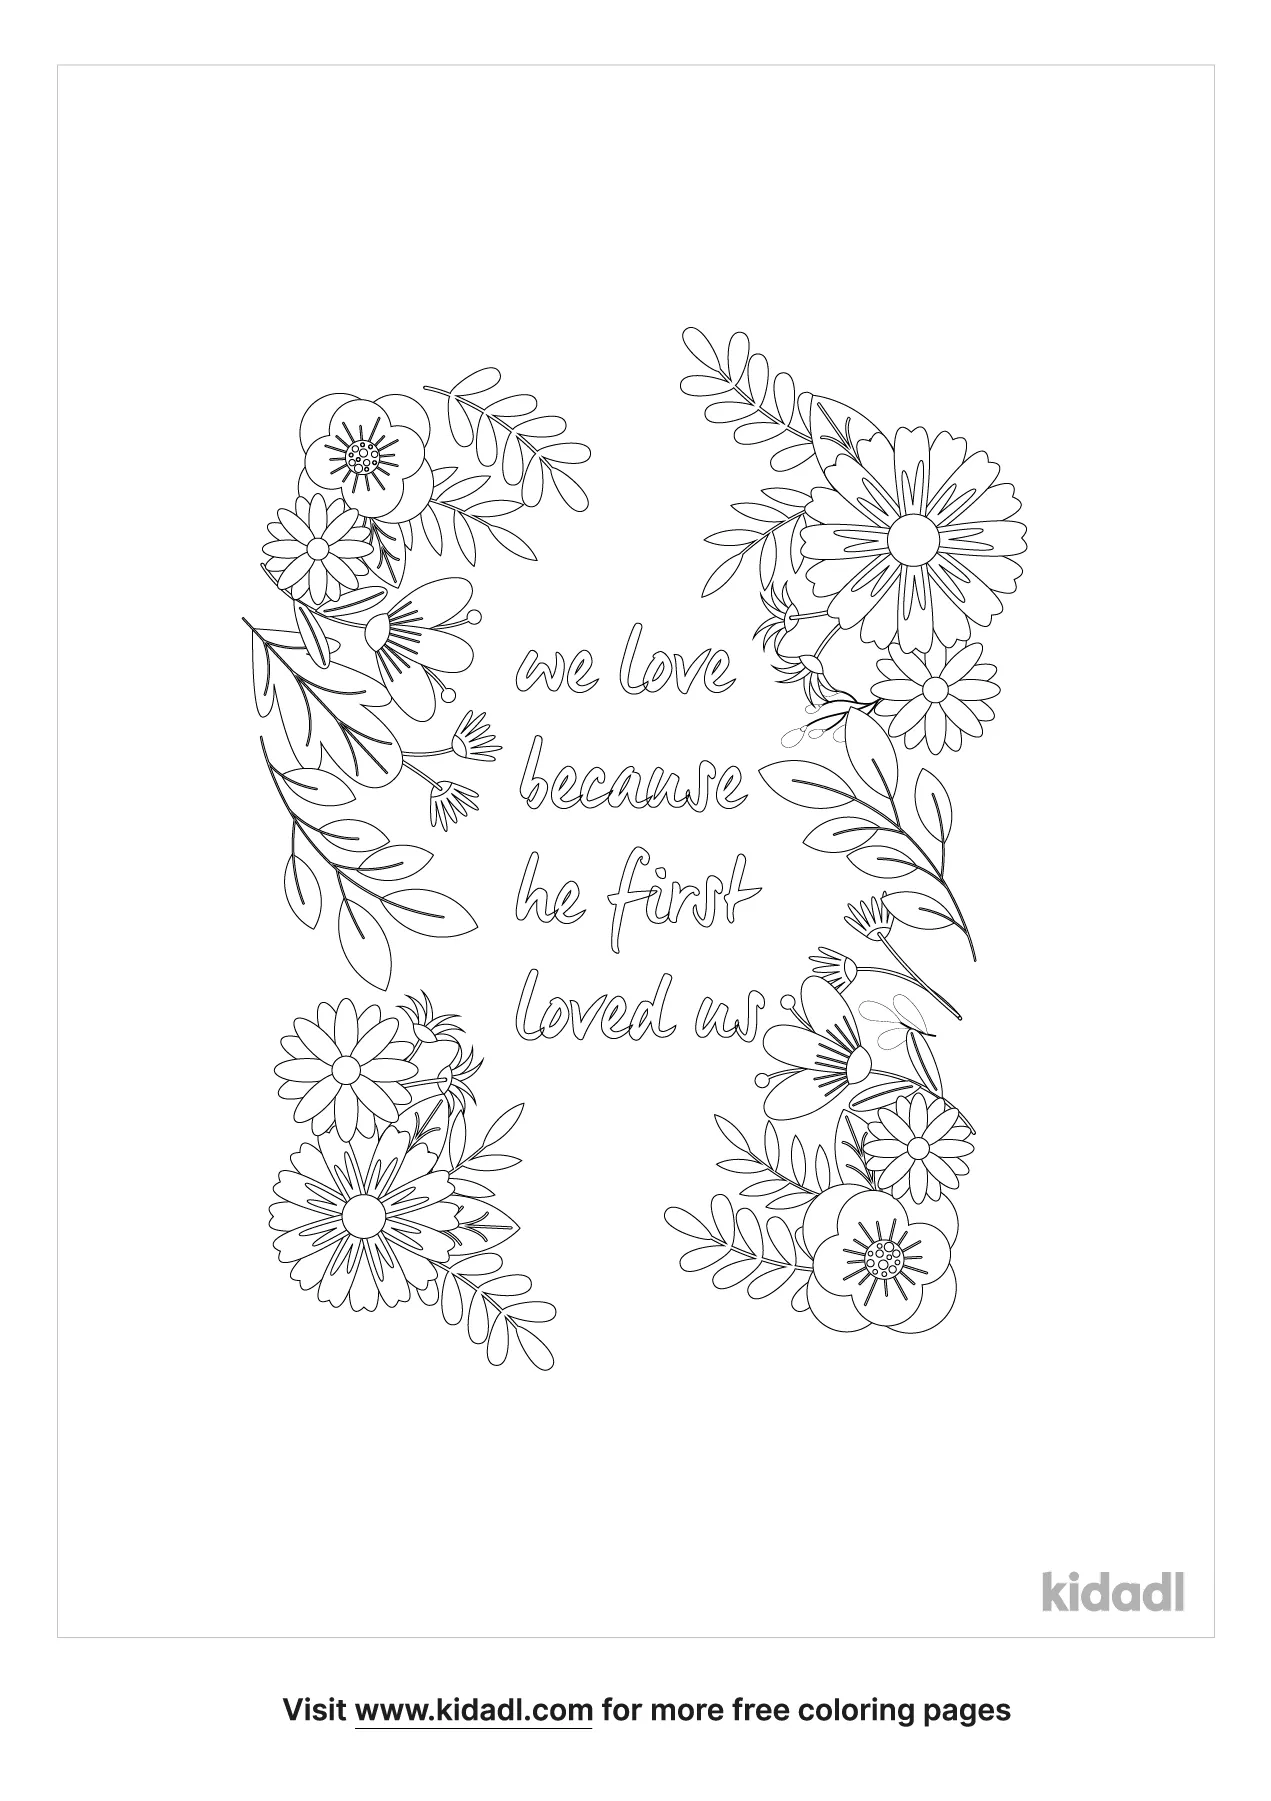 Free we love because he first loved us coloring page coloring page printables